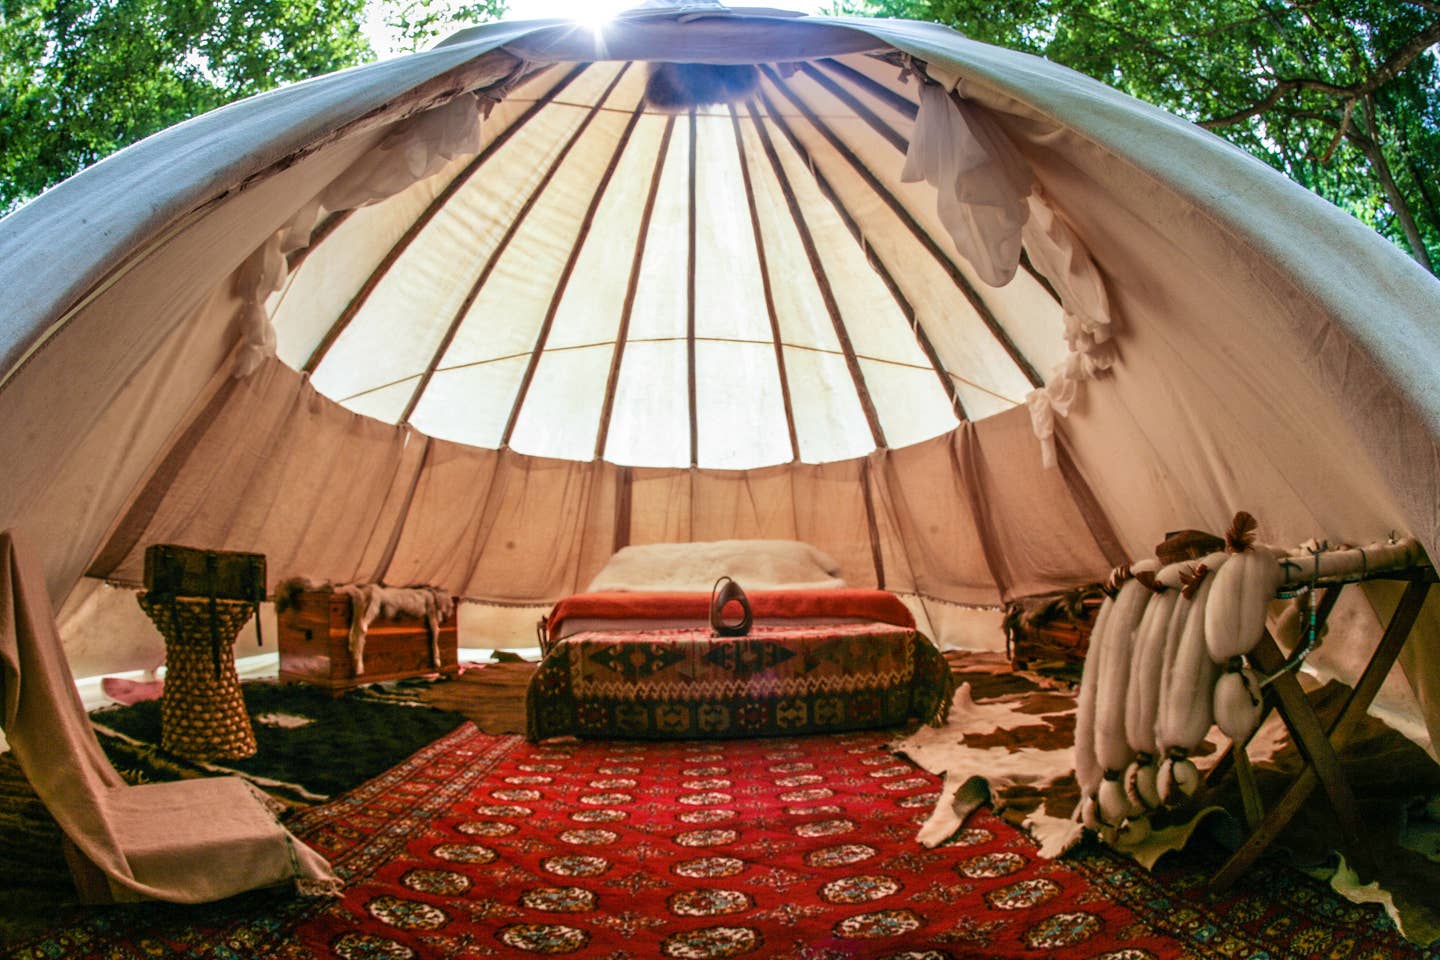 Most Unique USA Airbnbs tipi clamping tent Ozarks Missouri